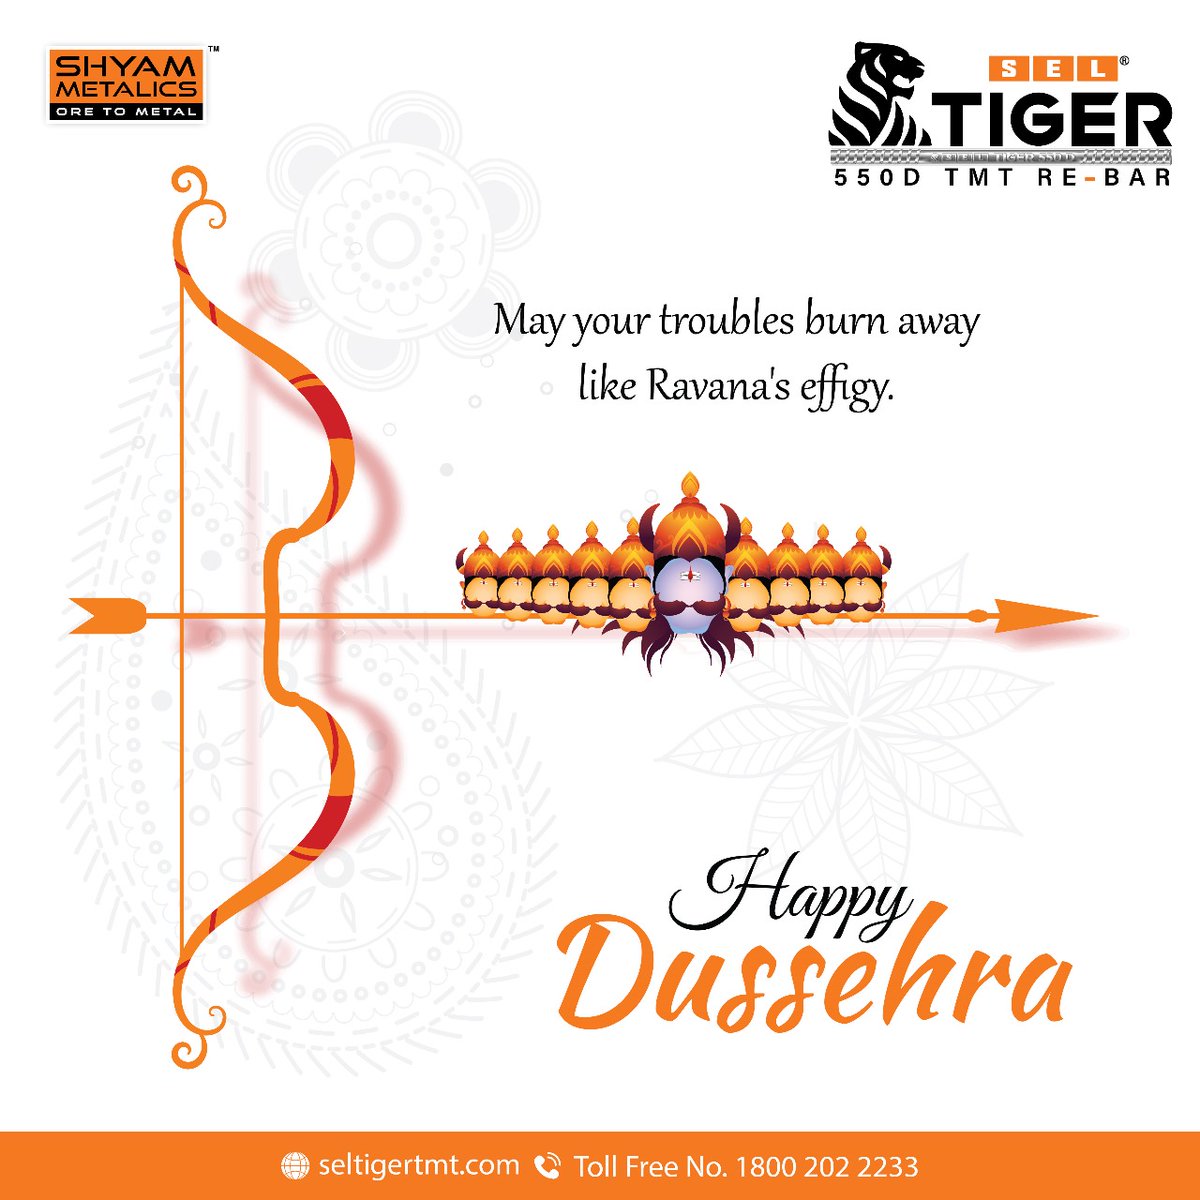 On this Dussehra, may the arrows of righteousness pierce through the darkness, lighting up our path with the eternal victory of good over evil. Wishing you a joyous Dussehra!

#SELTiger #ShyamMetalics #Dussehra #TMTBars #MazbootNeev #Strength #Victory